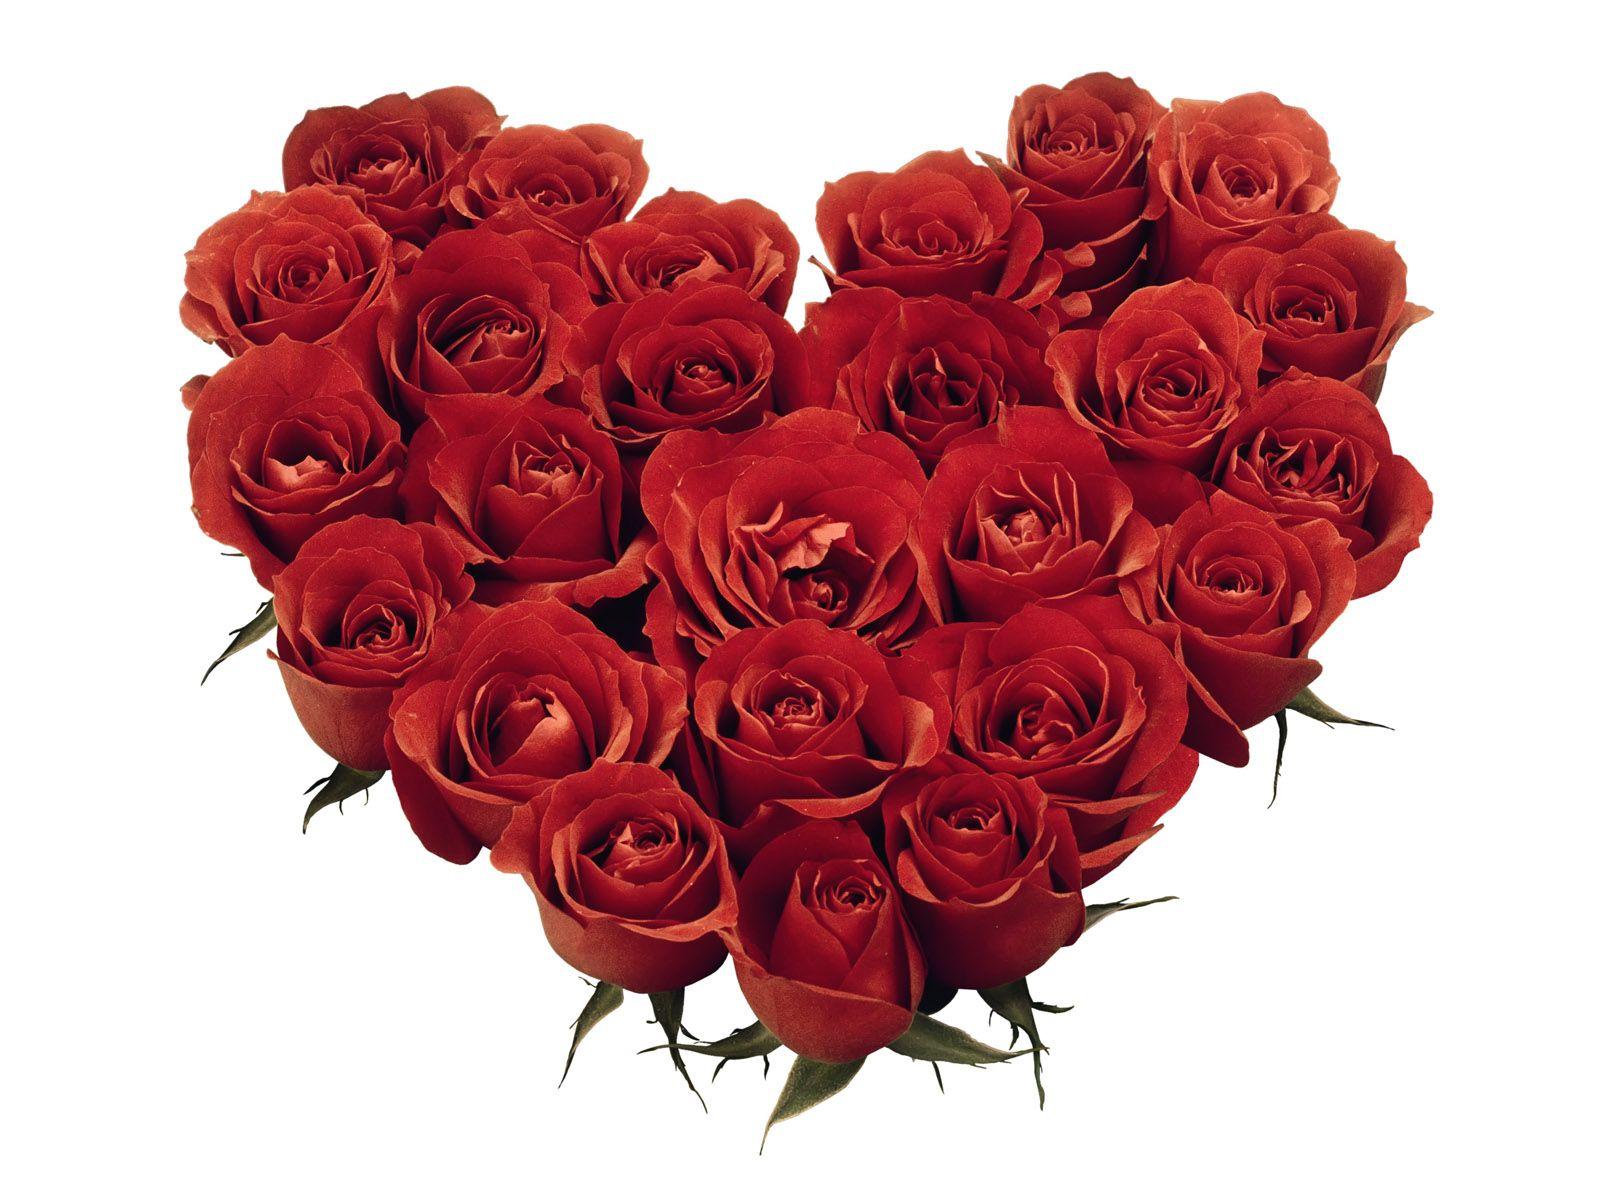 Valentines Day Red Roses Heart Shaped Bouquet Desktop Wallpaper